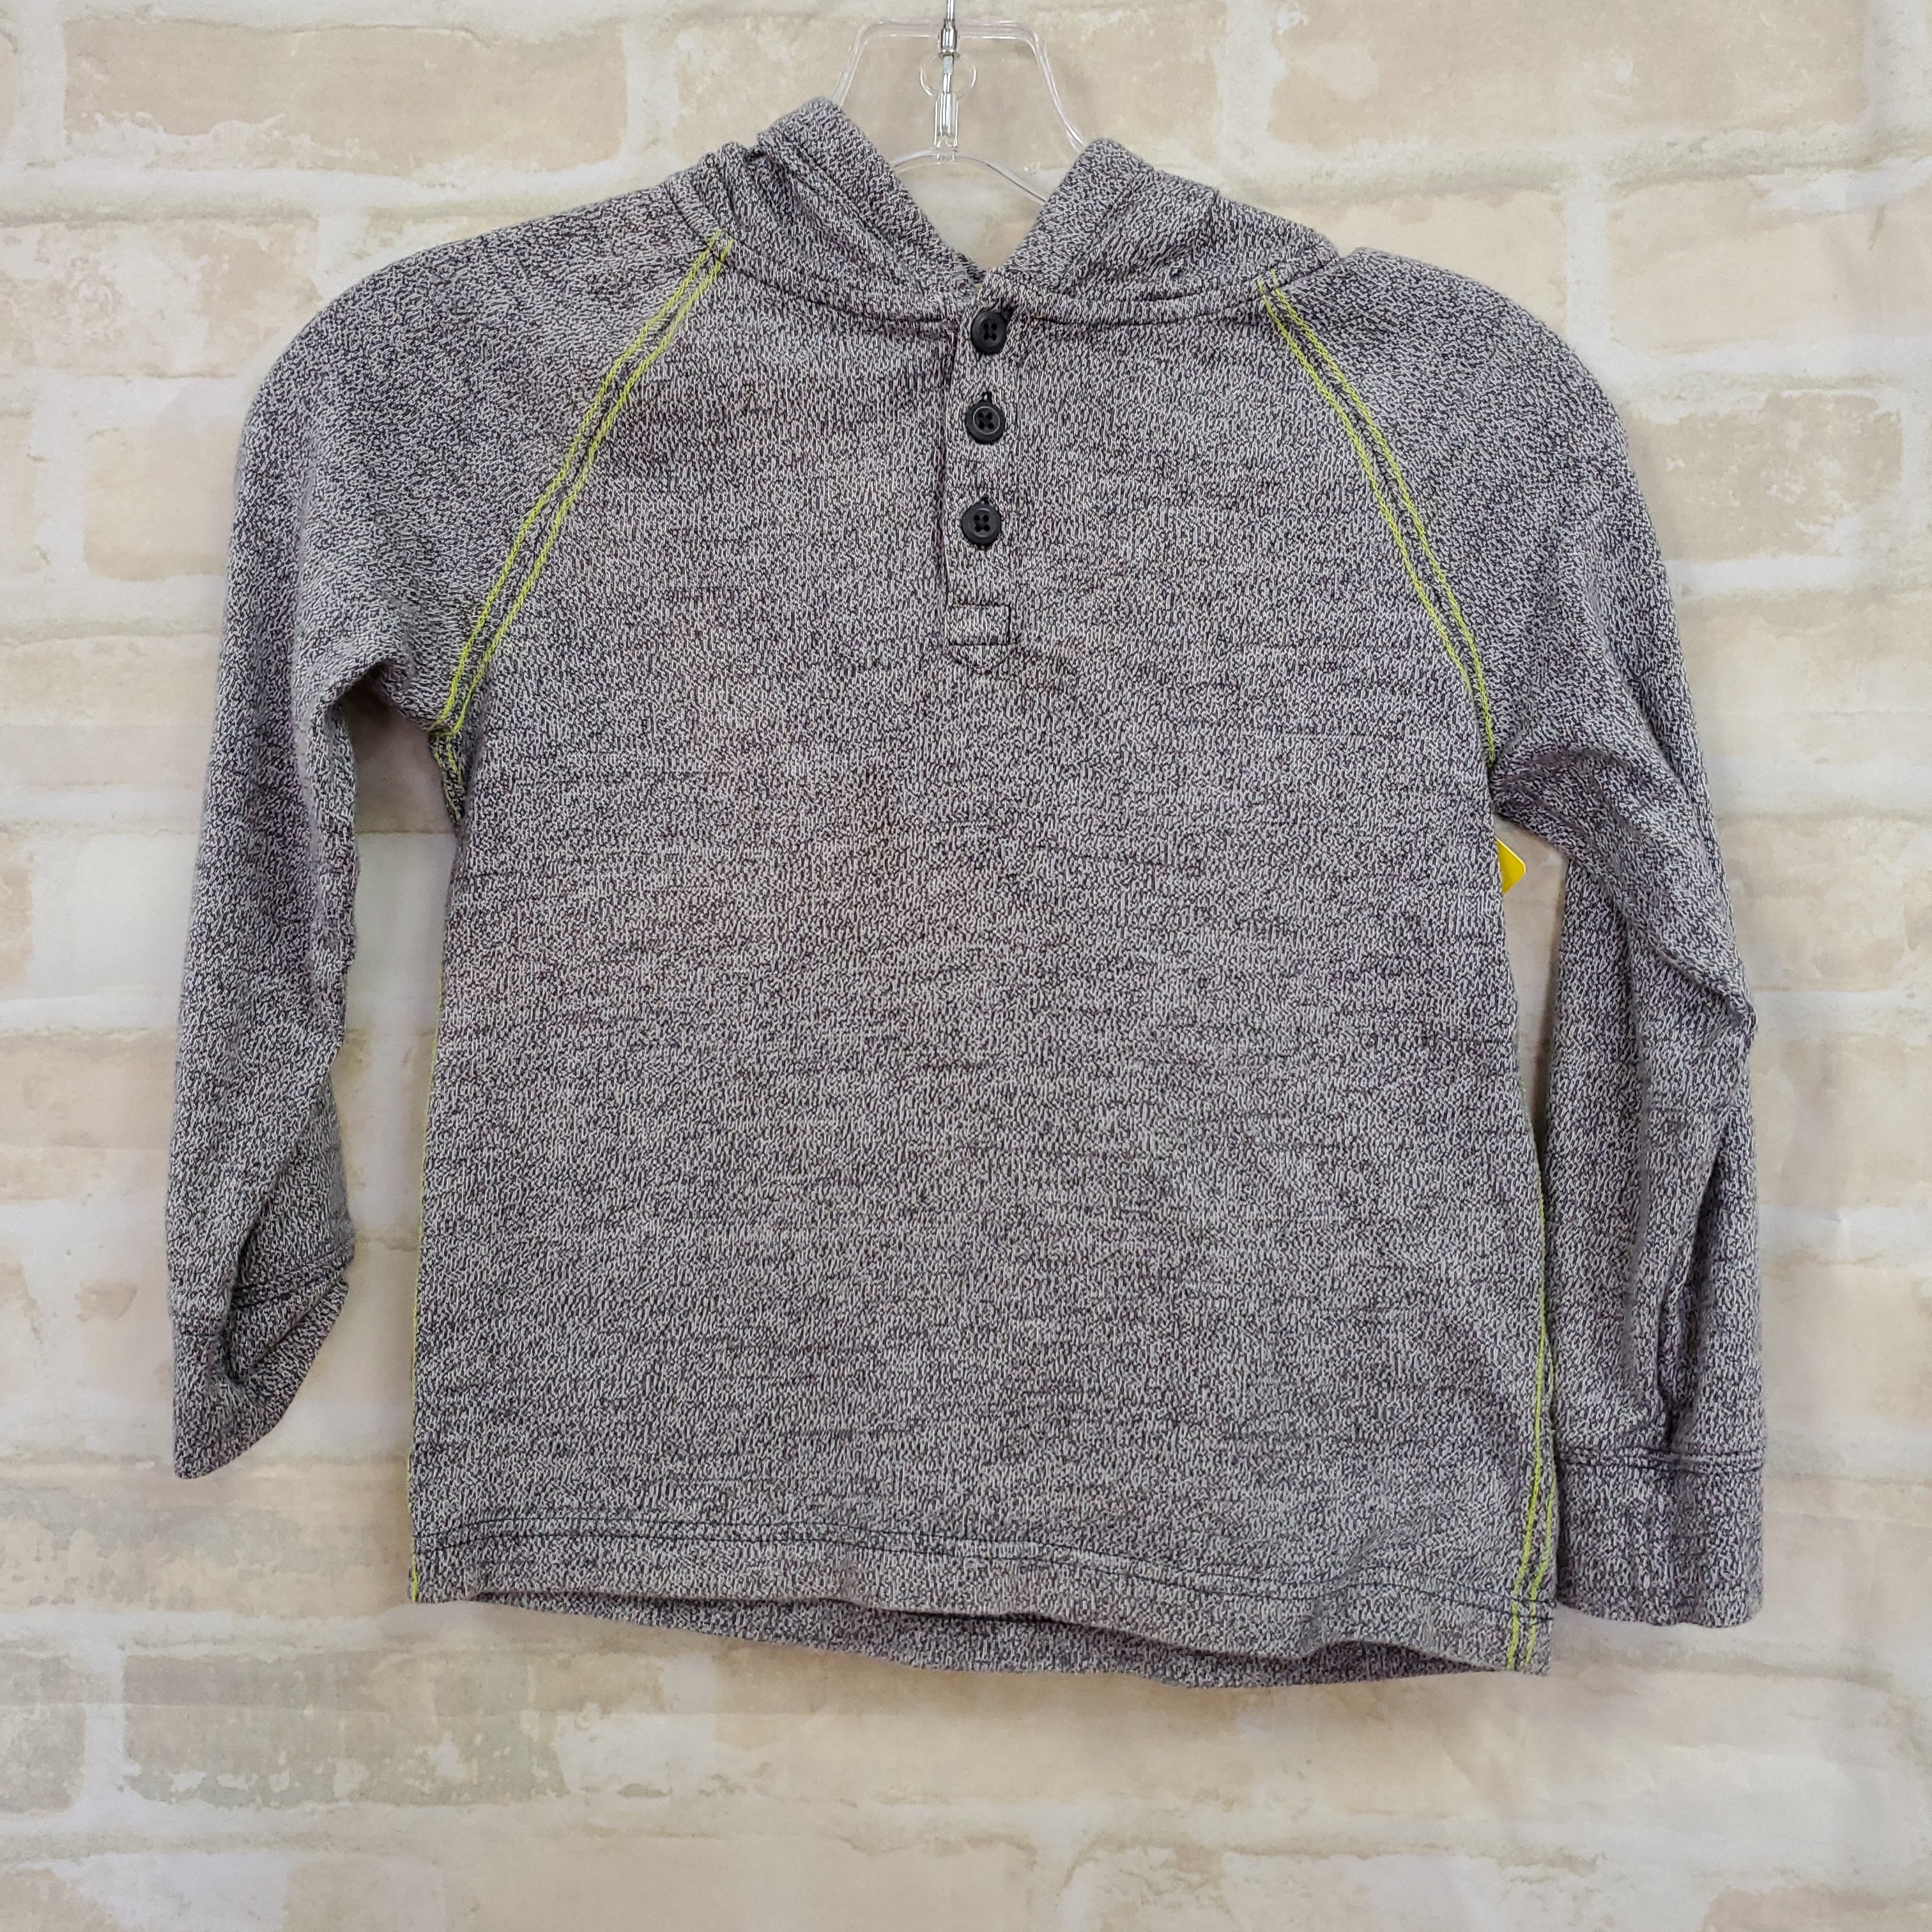 Gymboree boys top gray knit L/S hooded 7